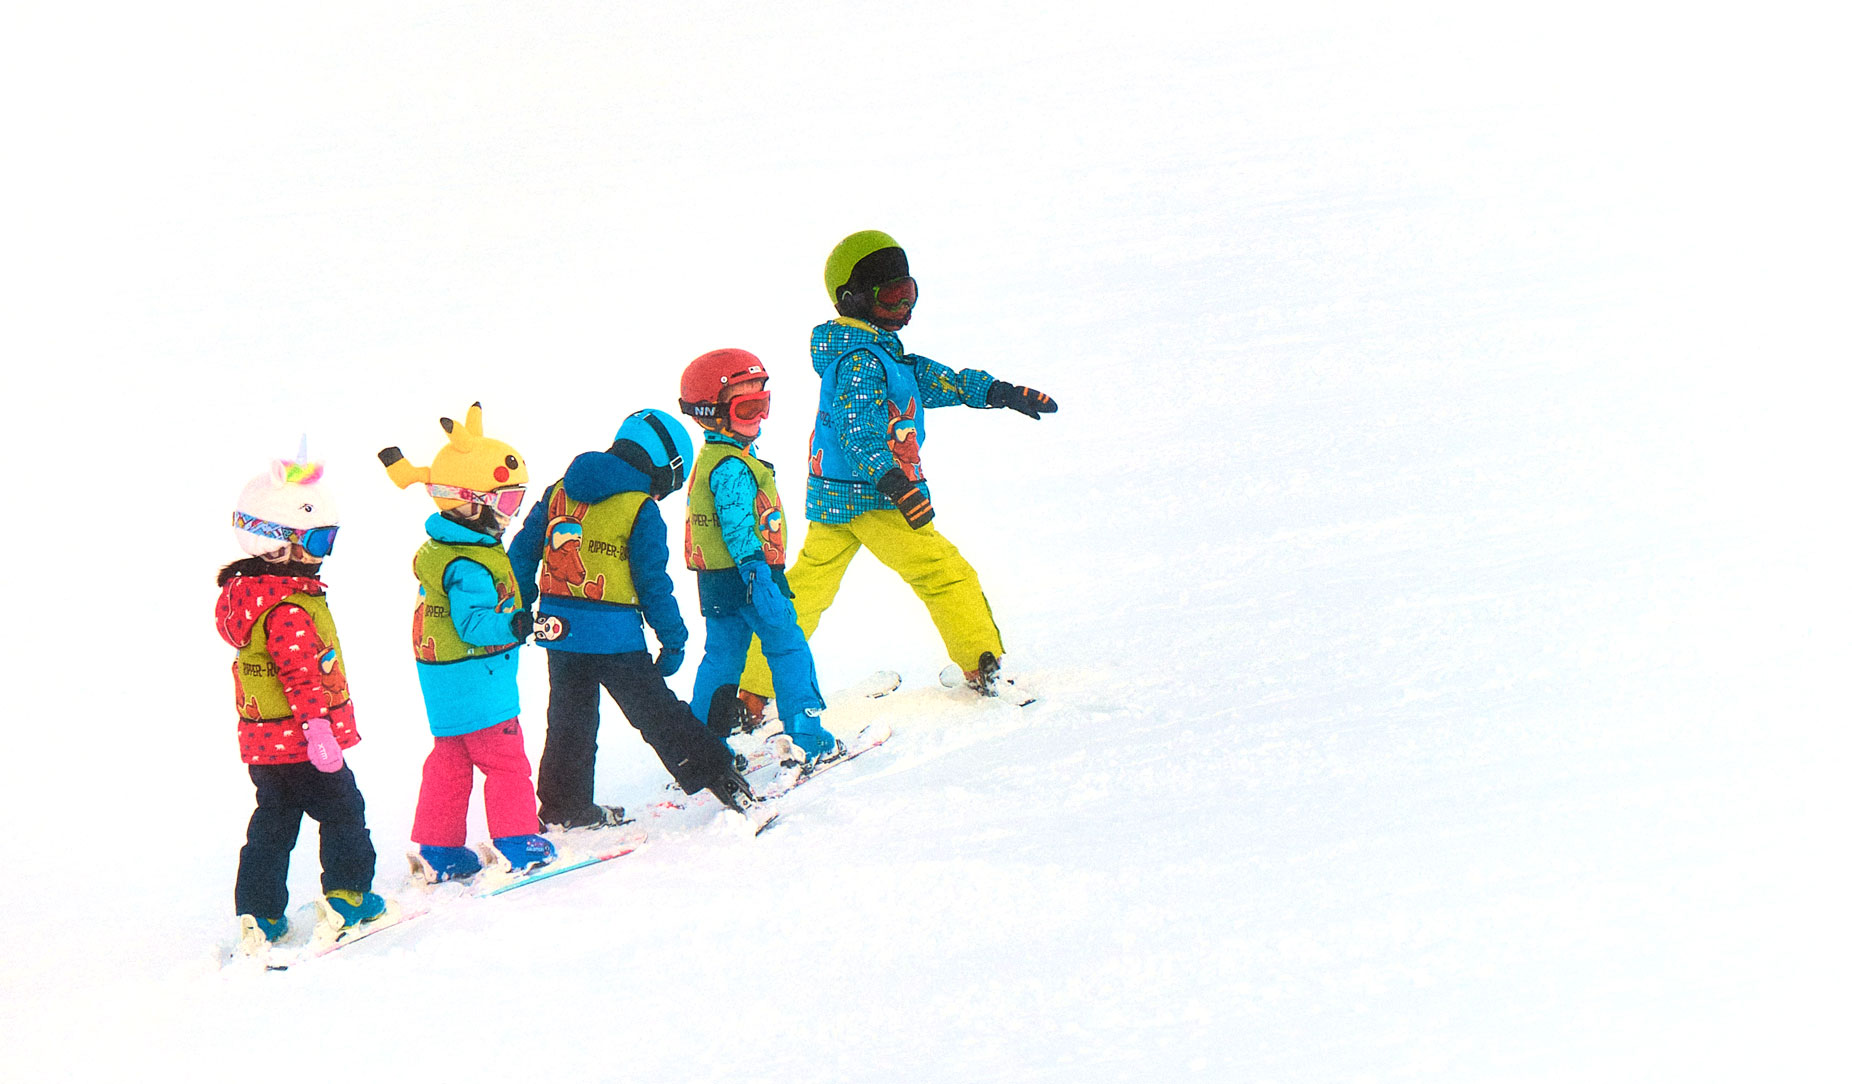 Kids walking uphill on the snow in skis